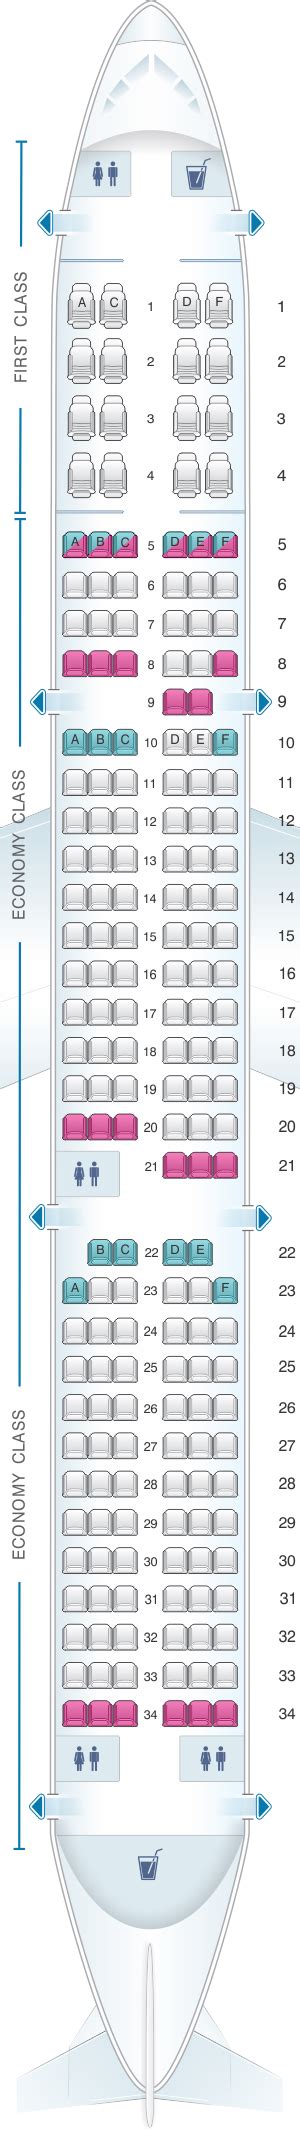 American Airlines Small Plane Seating Chart